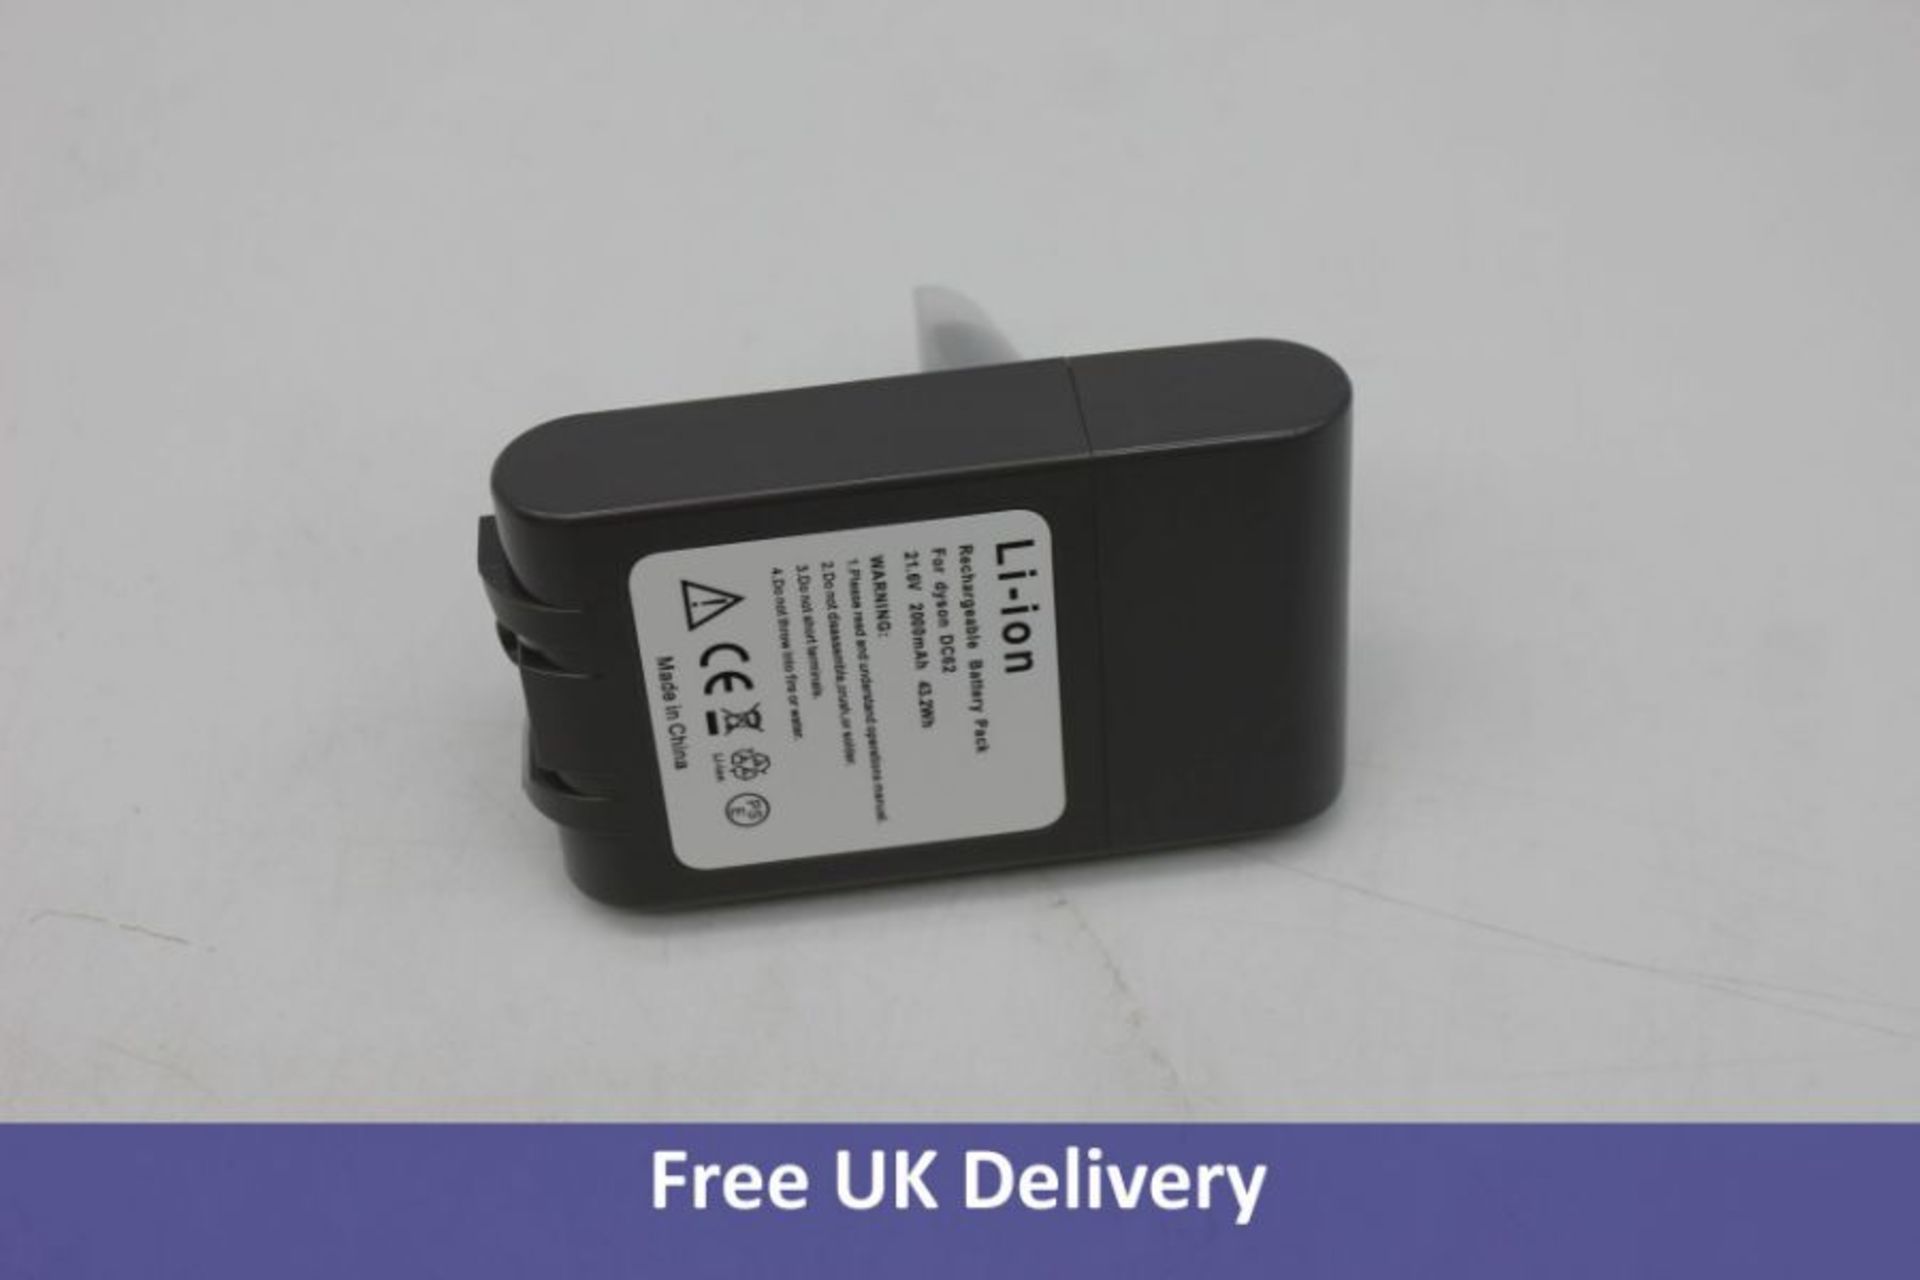 Four Vacuum Cleaner Batteries suitable for Dyson V6 DC58 DC59 - Image 2 of 2